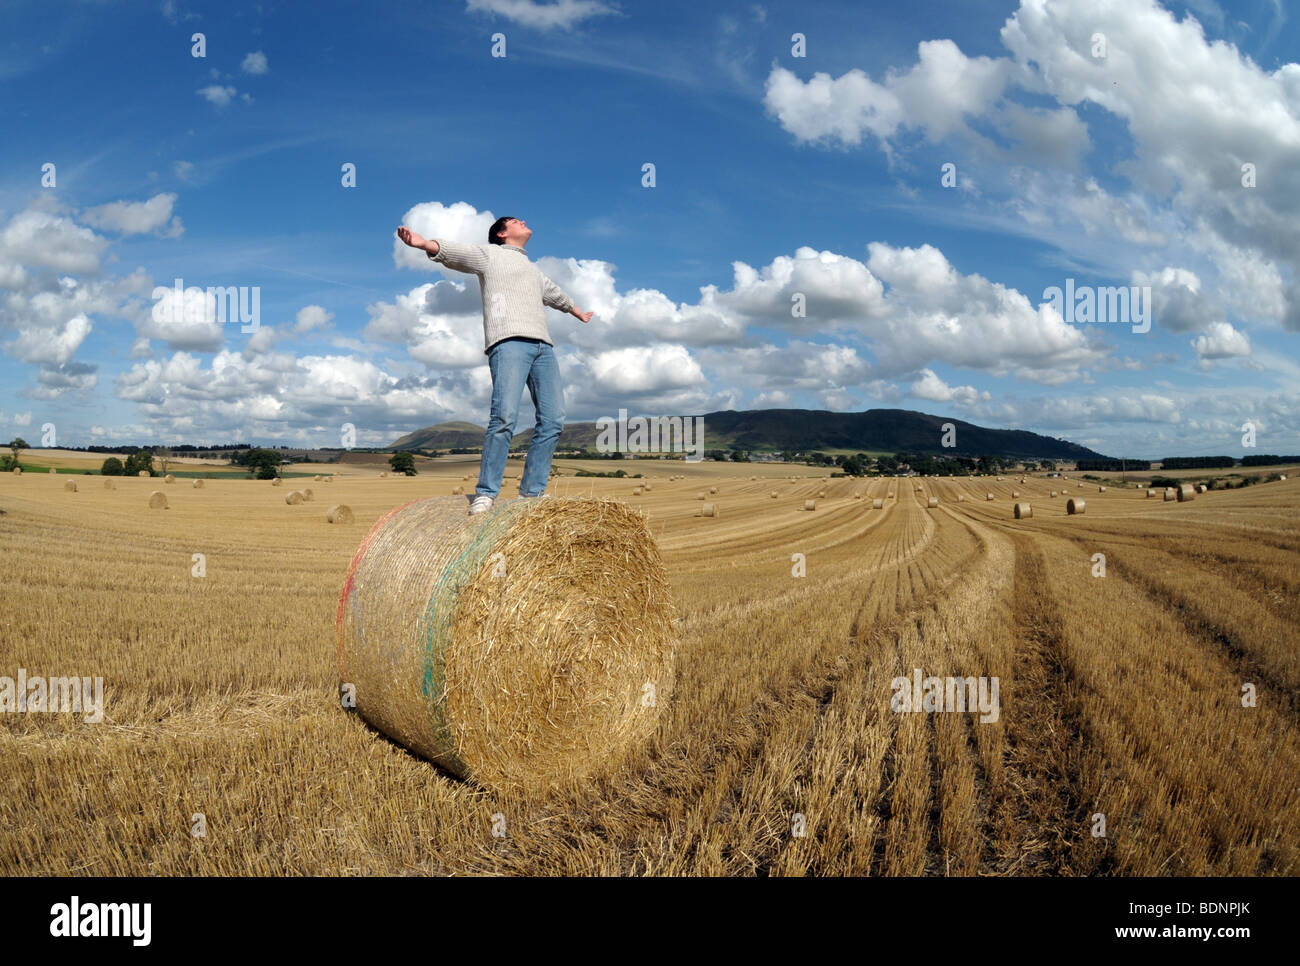 A young boy in a field with hay bales with arms outstretched. Stock Photo